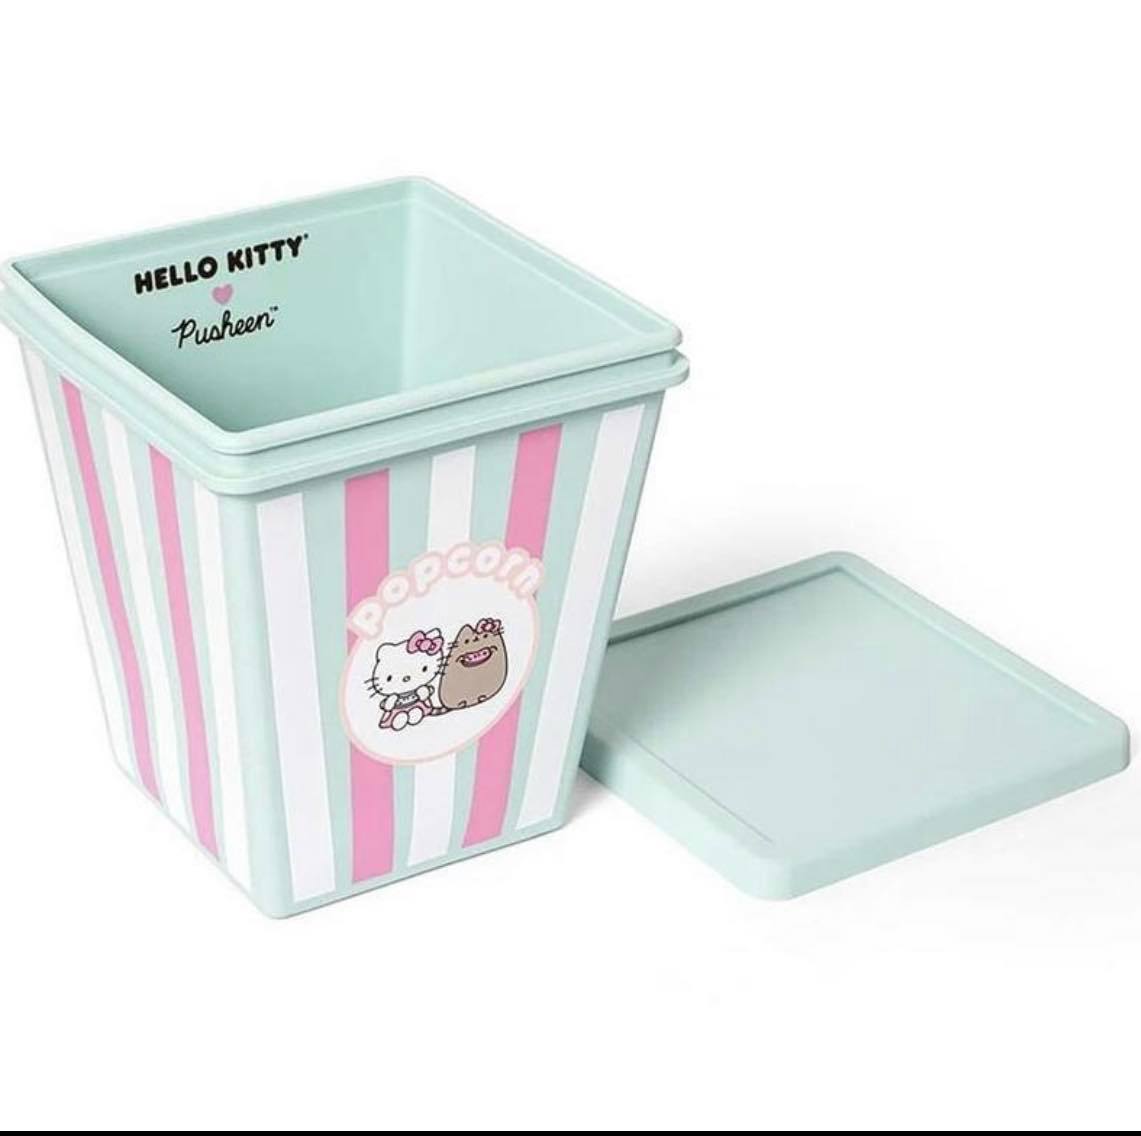 Hello Kitty x Pusheen Microwavable Silicone Popcorn Maker